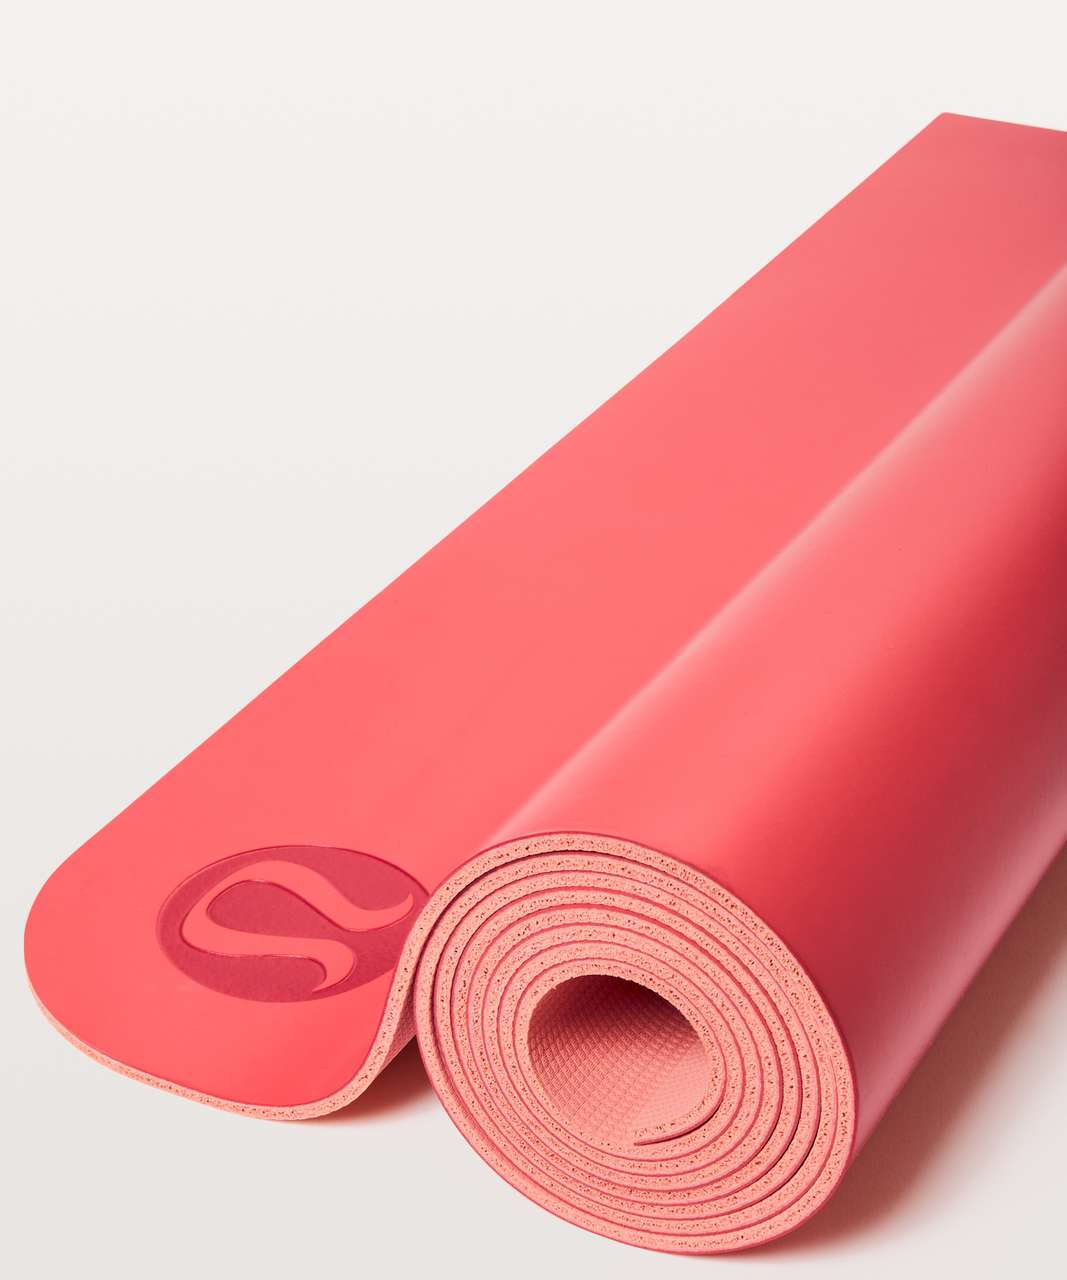 Lululemon The Reversible Mat 3mm - Cape Red / Sunny Coral